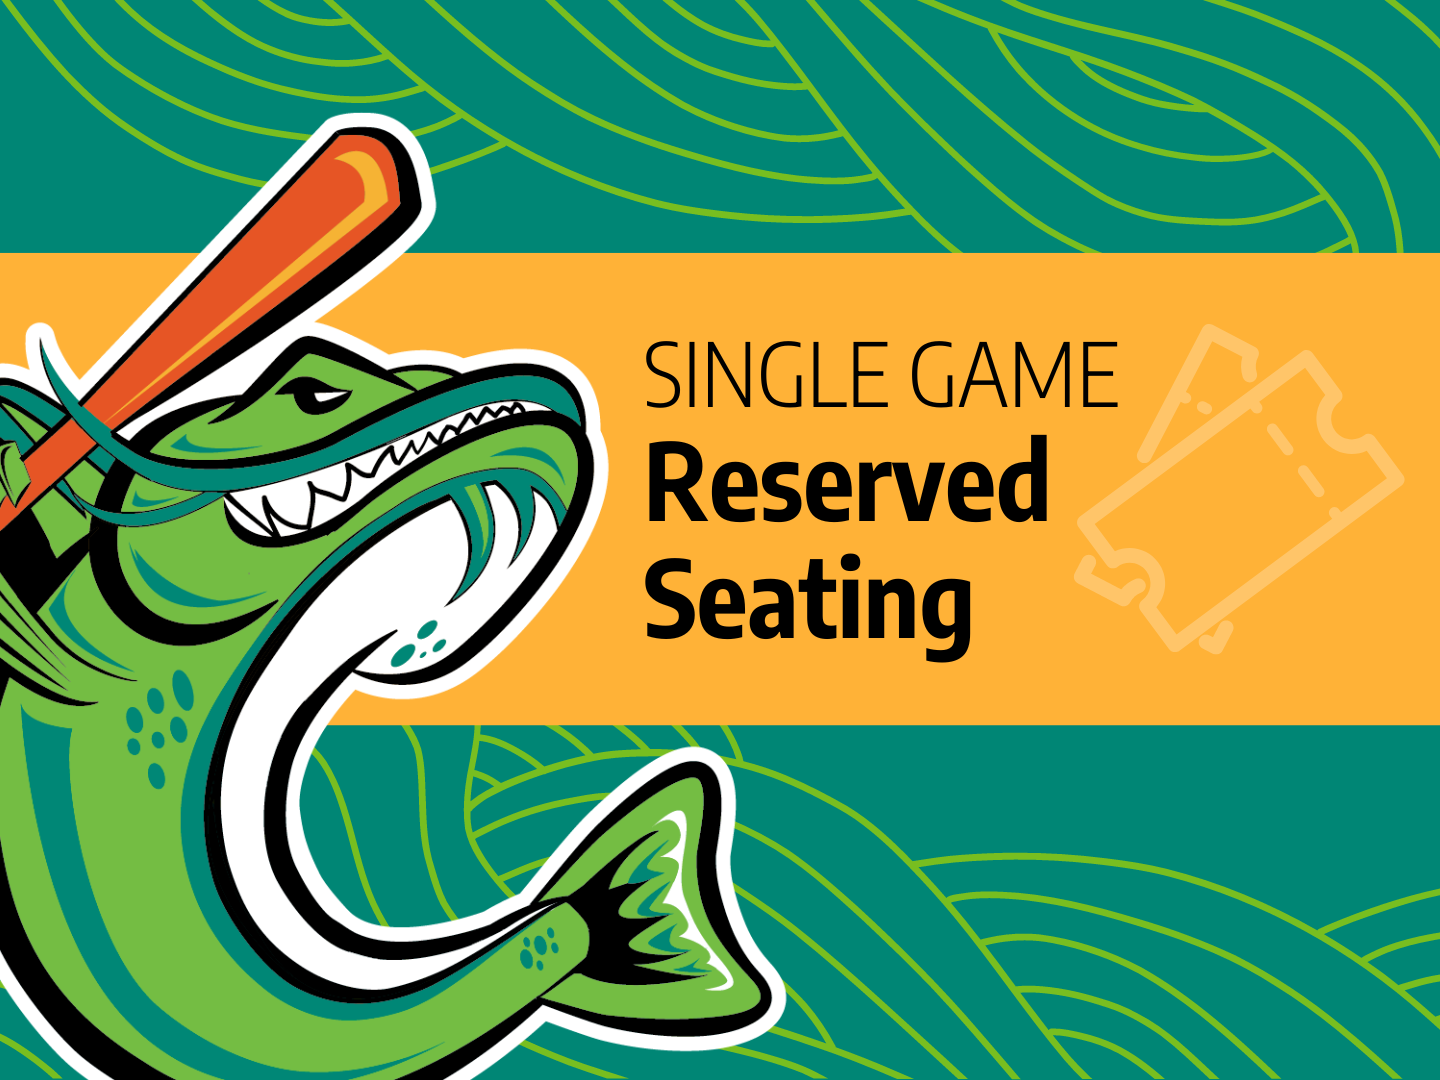 Single Game Reserved Seating